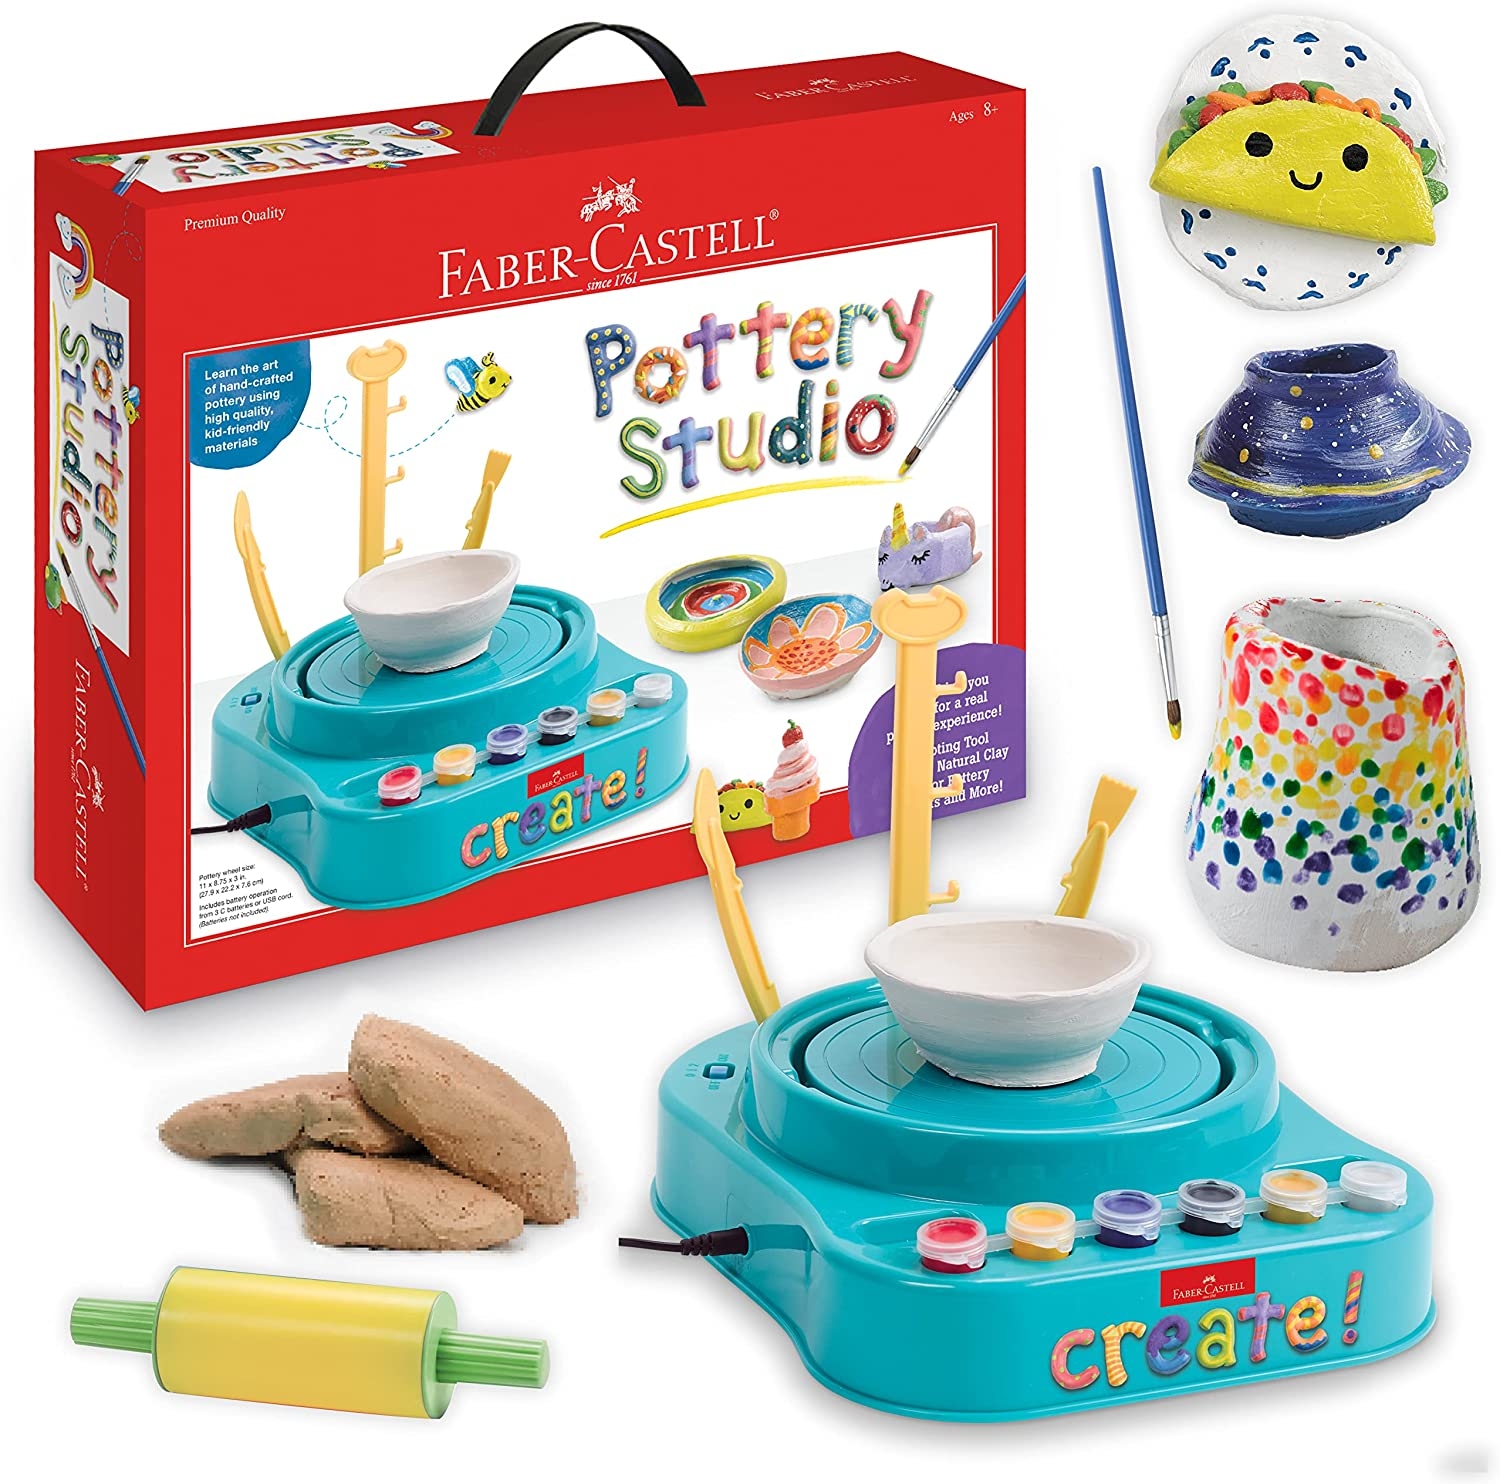 Faber-Castell Pottery Studio – Kids Pottery Wheel Kit for Ages 8+, Complete Pottery Wheel and Painting Kit for Beginners, 3 lbs